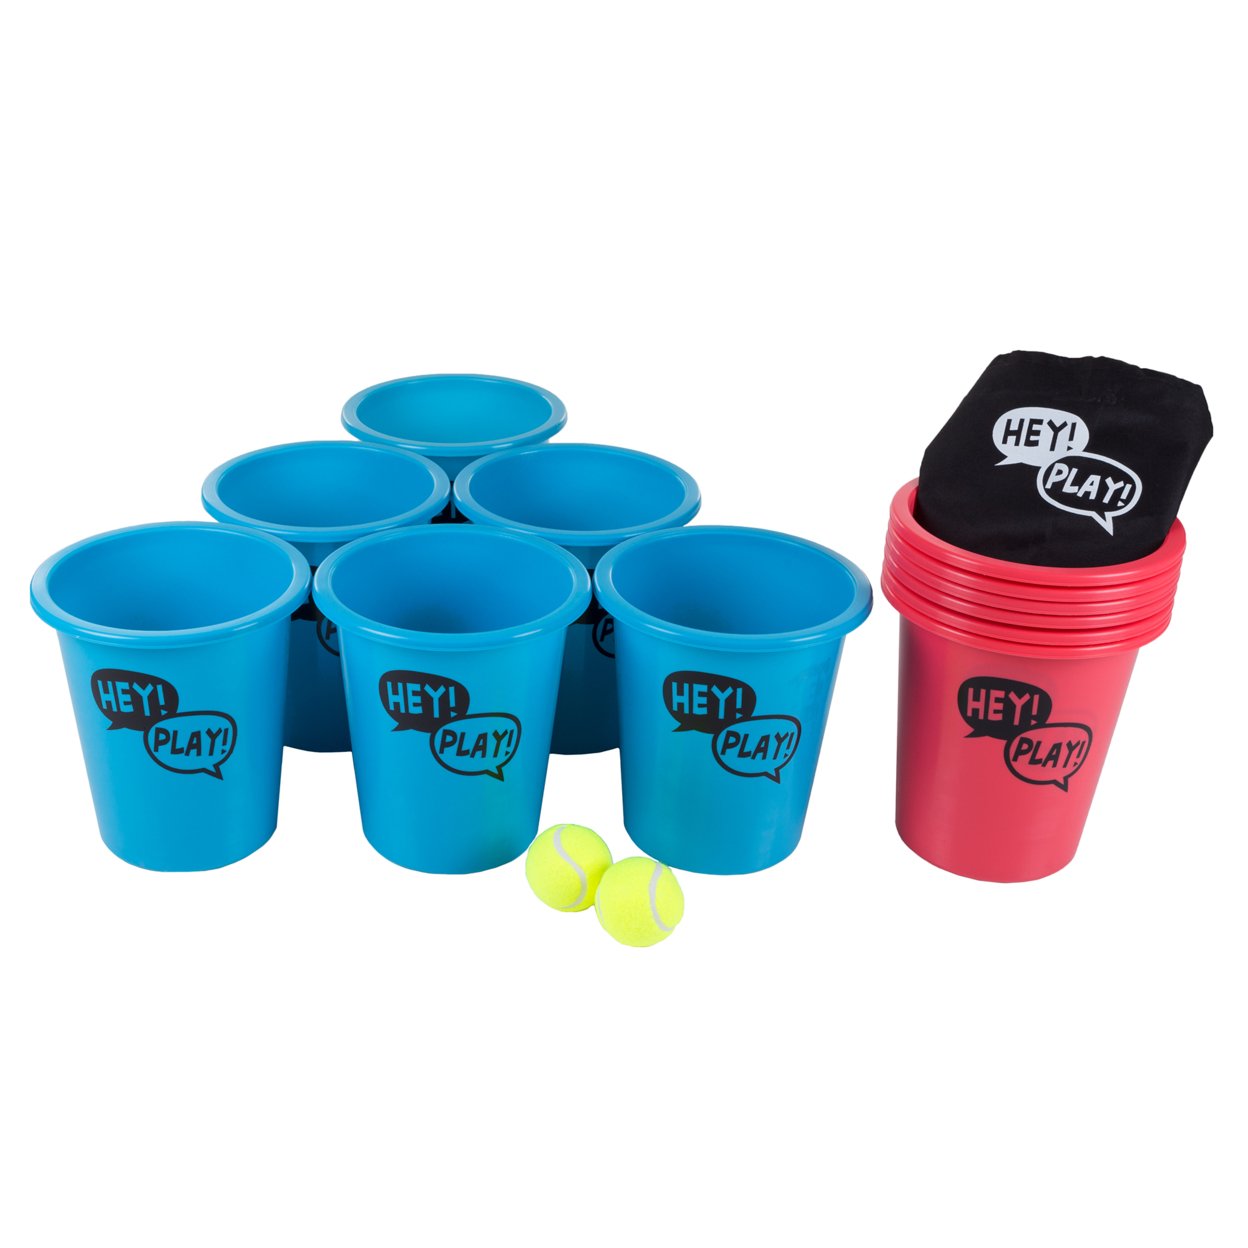 Large Cup Ball Big Beer Pong Outdoor Game Set For Kids And Adults With 12 Pails 2 Balls, Tote Bag By Hey! Play!